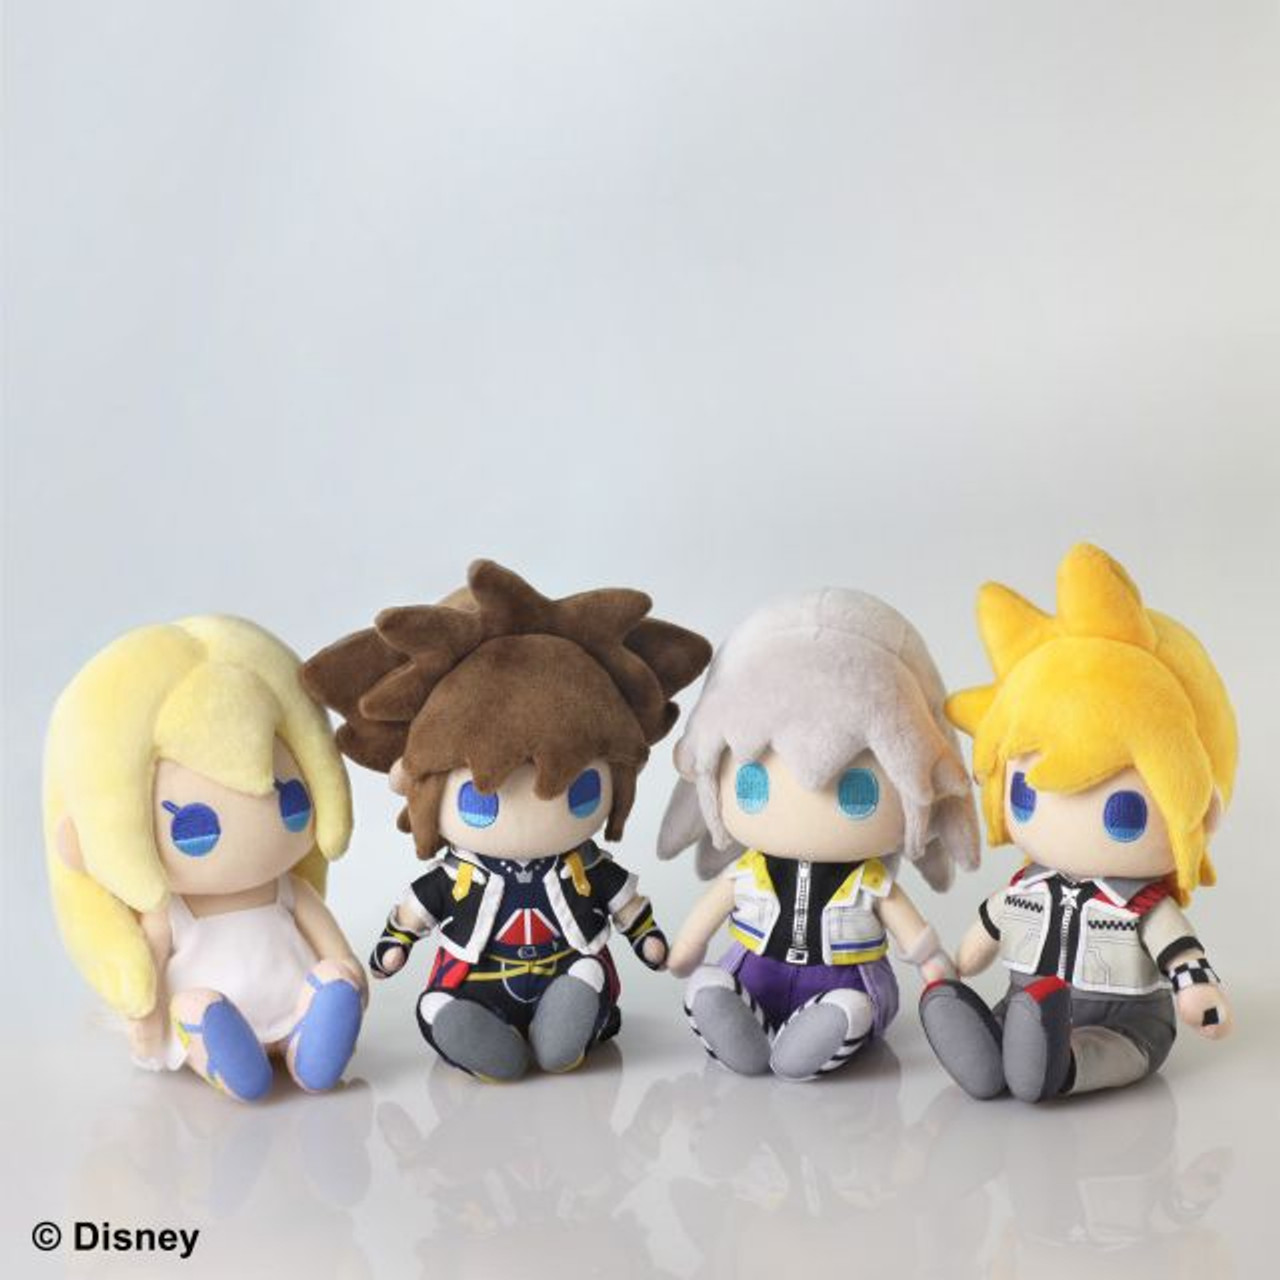 These Kingdom Hearts Figurines are Royally Cute »